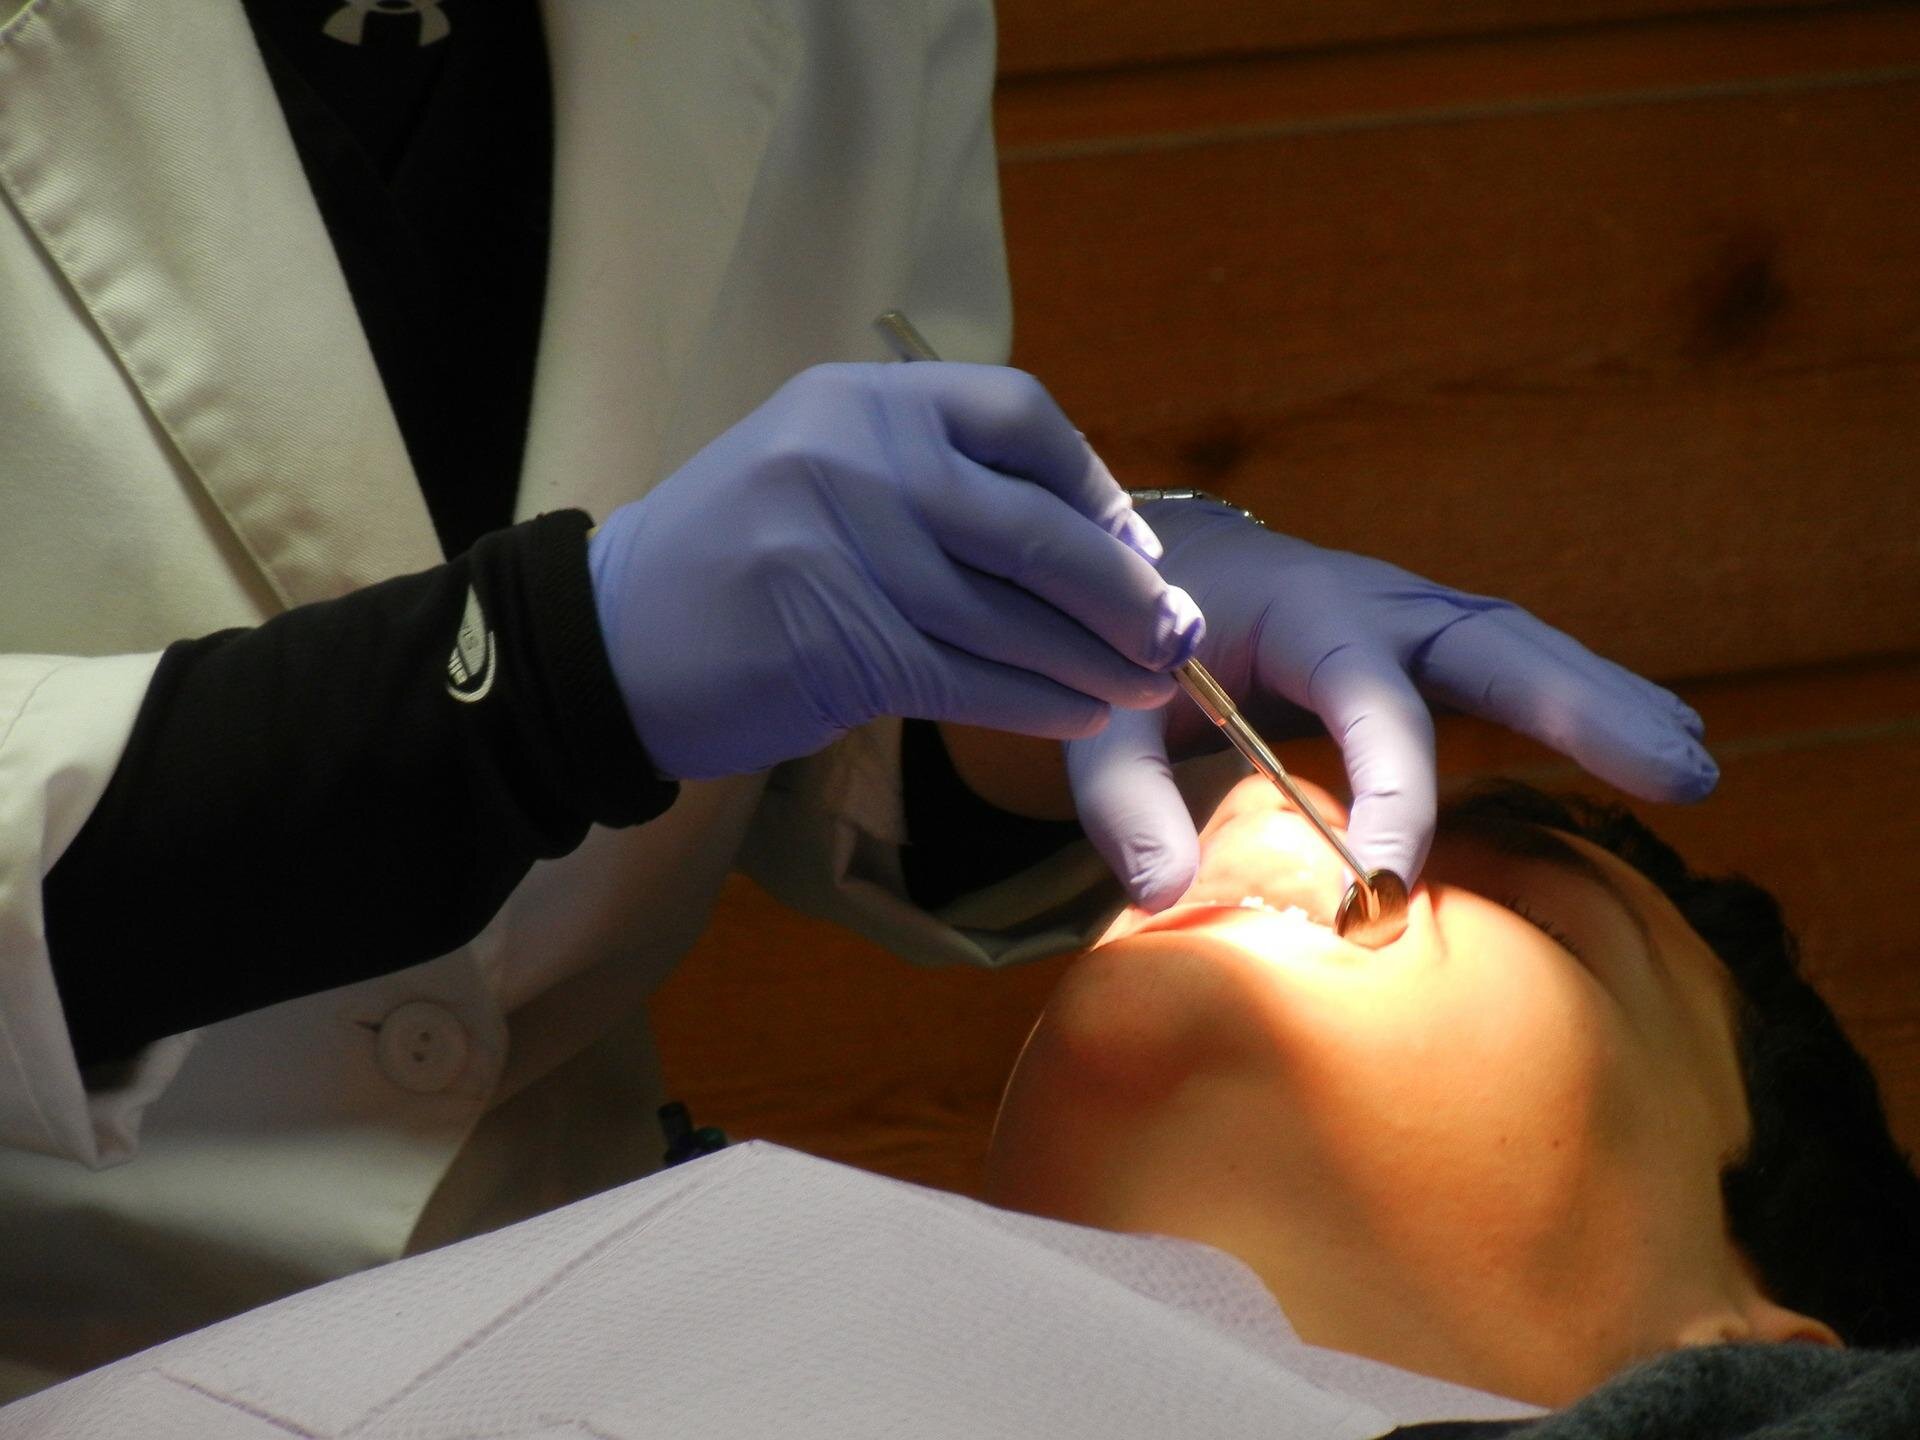 Dental care reduces likelihood of hospitalization for people with diabetes or coronary artery disease